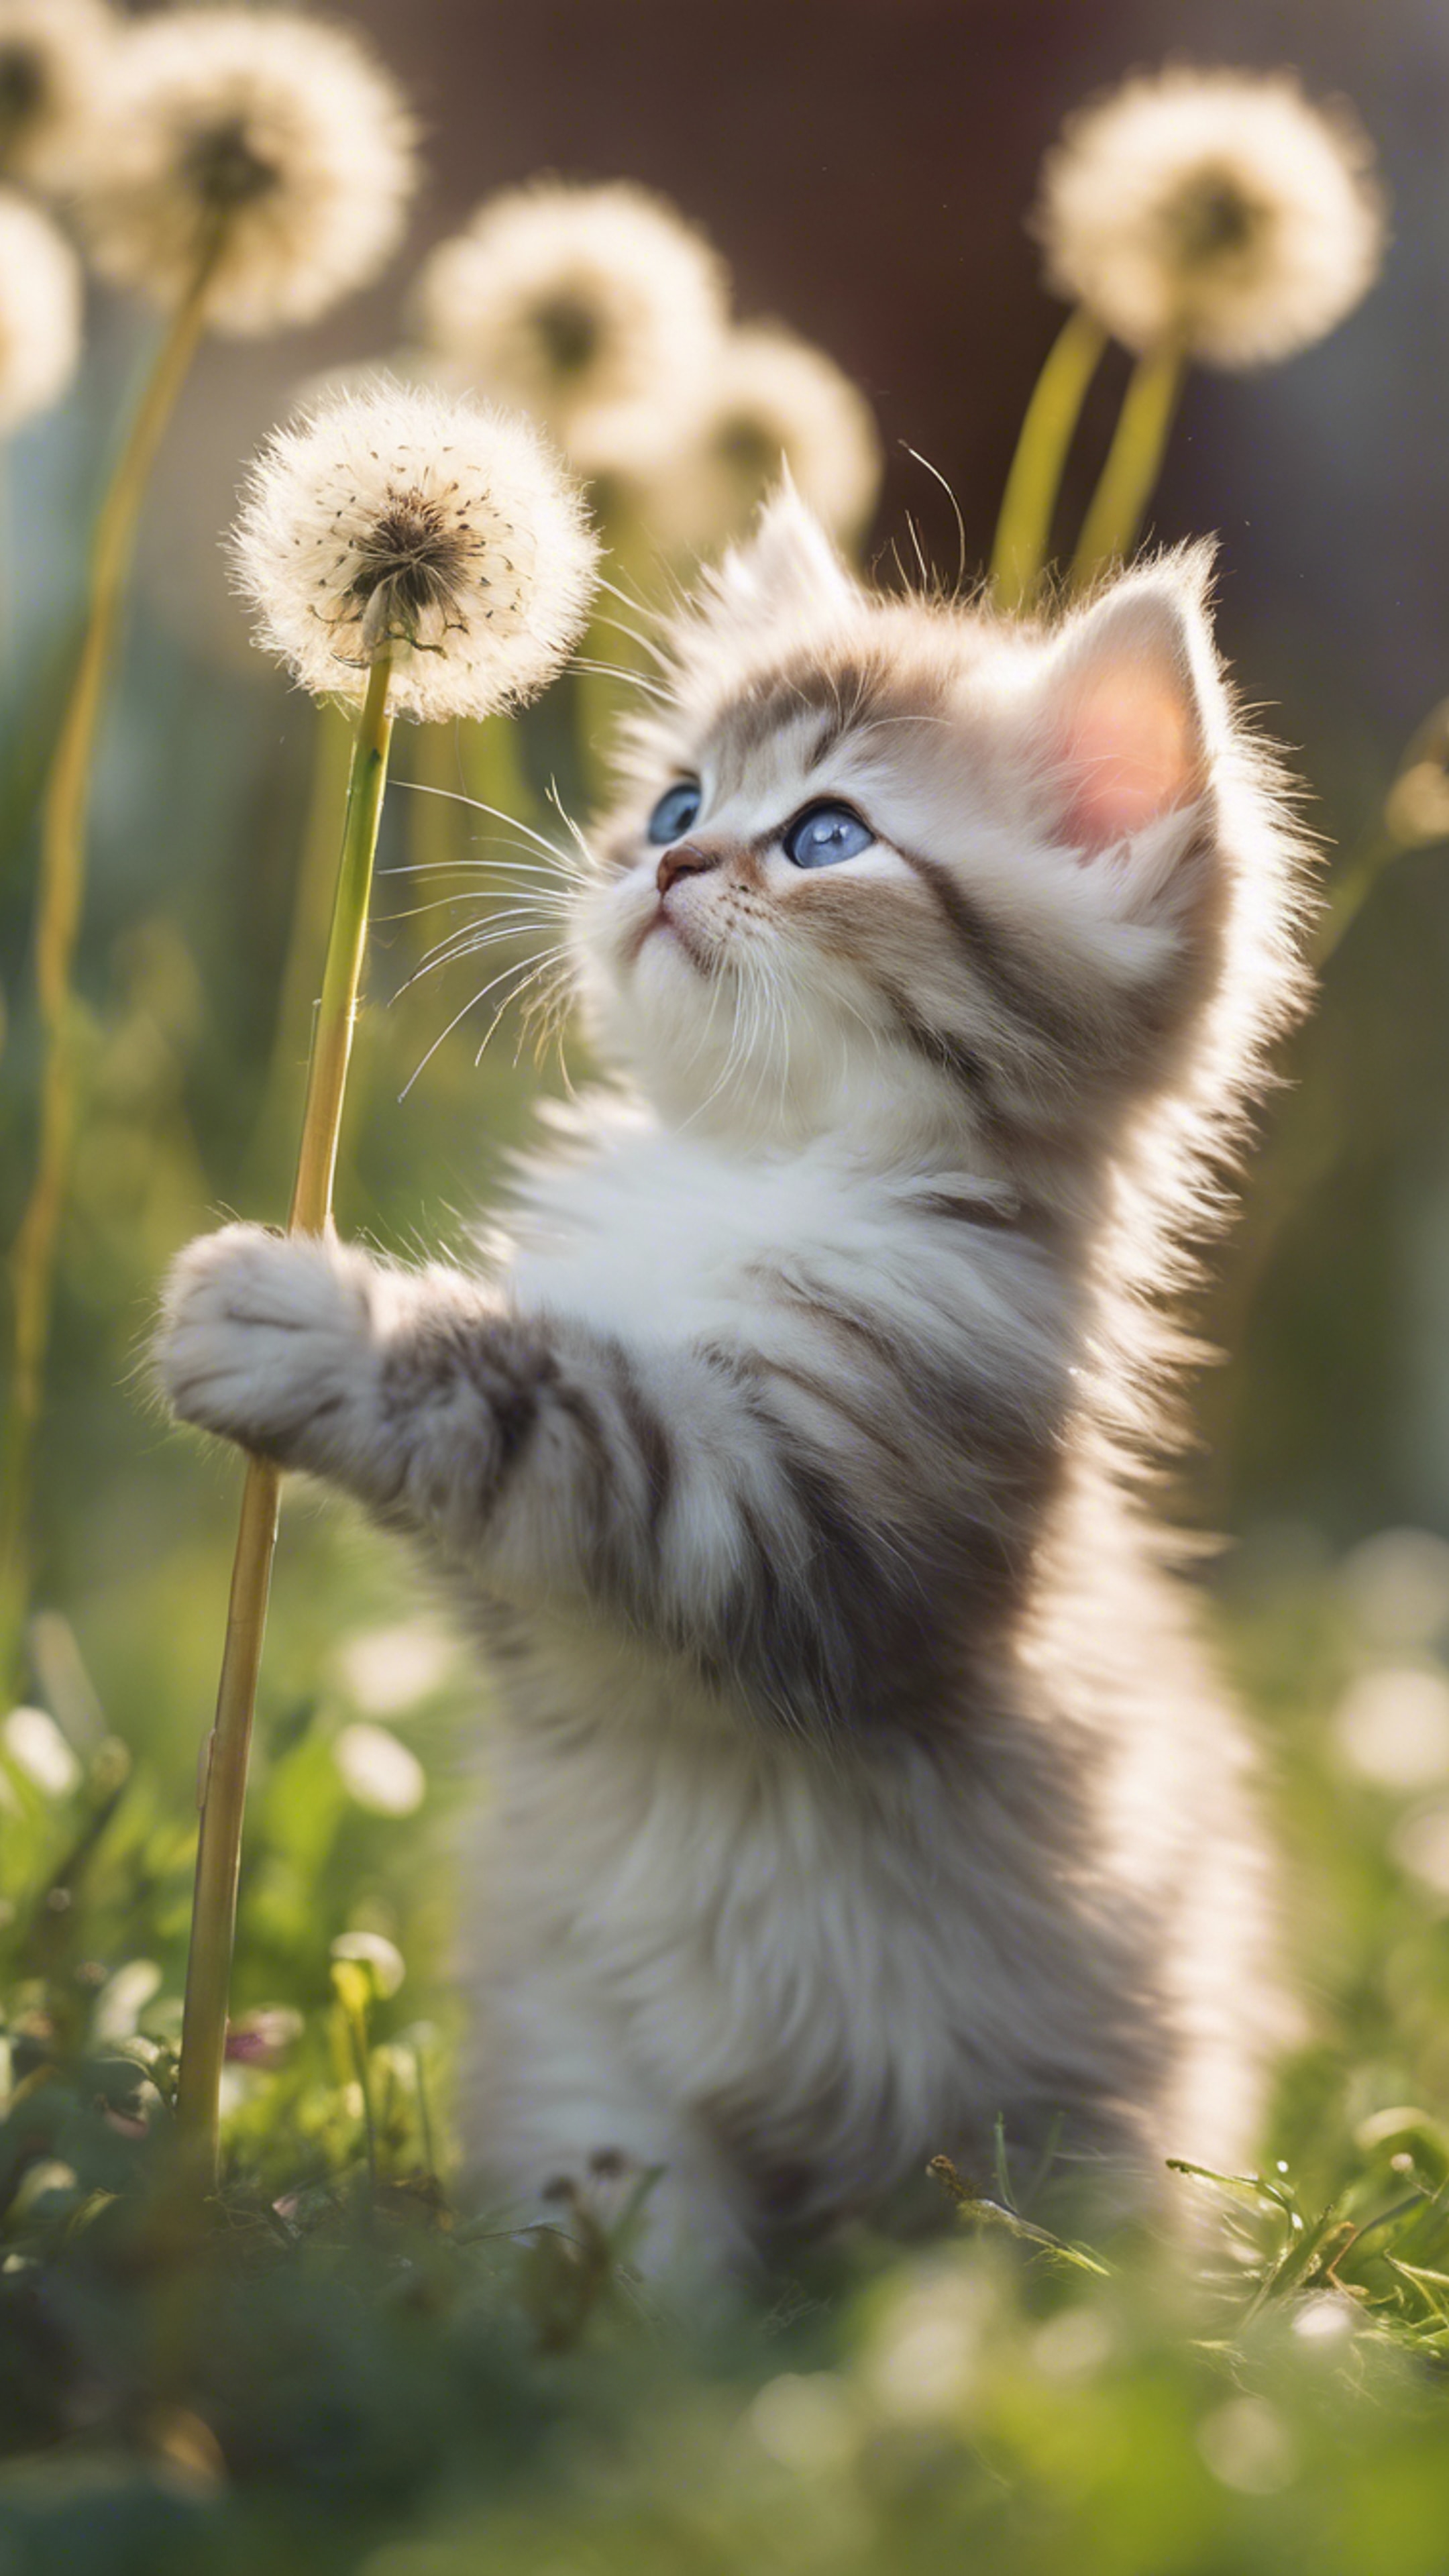 A curious Persian kitten playfully batting at a dandelishion puff in the midst of spring bloom. วอลล์เปเปอร์[a1f5779e66044a4f83a1]